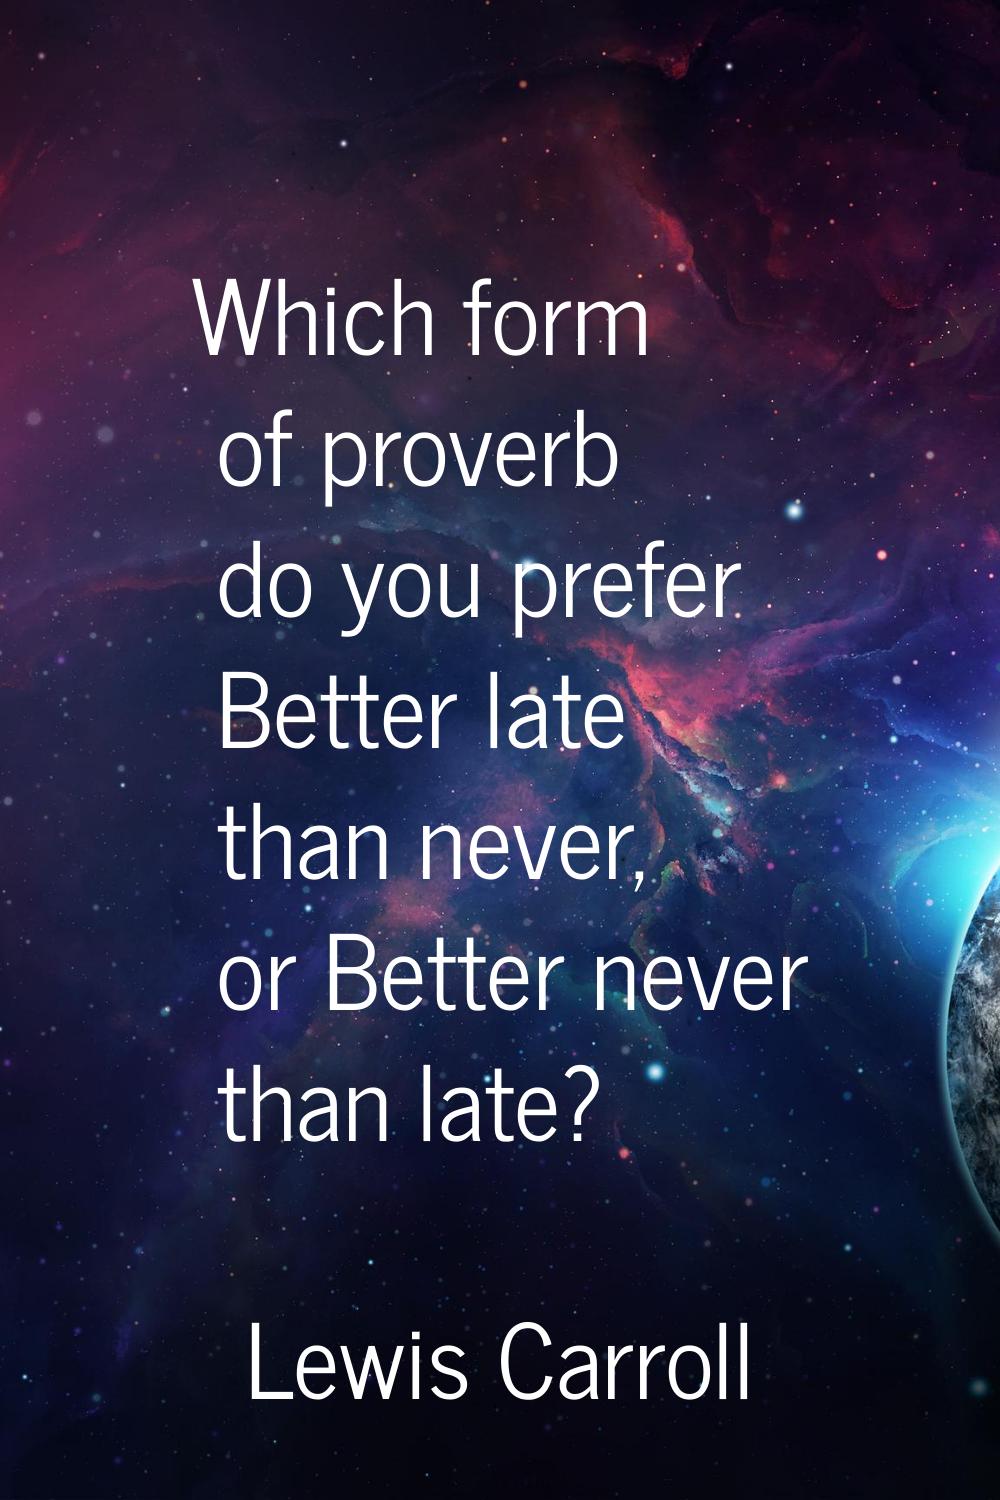 Which form of proverb do you prefer Better late than never, or Better never than late?